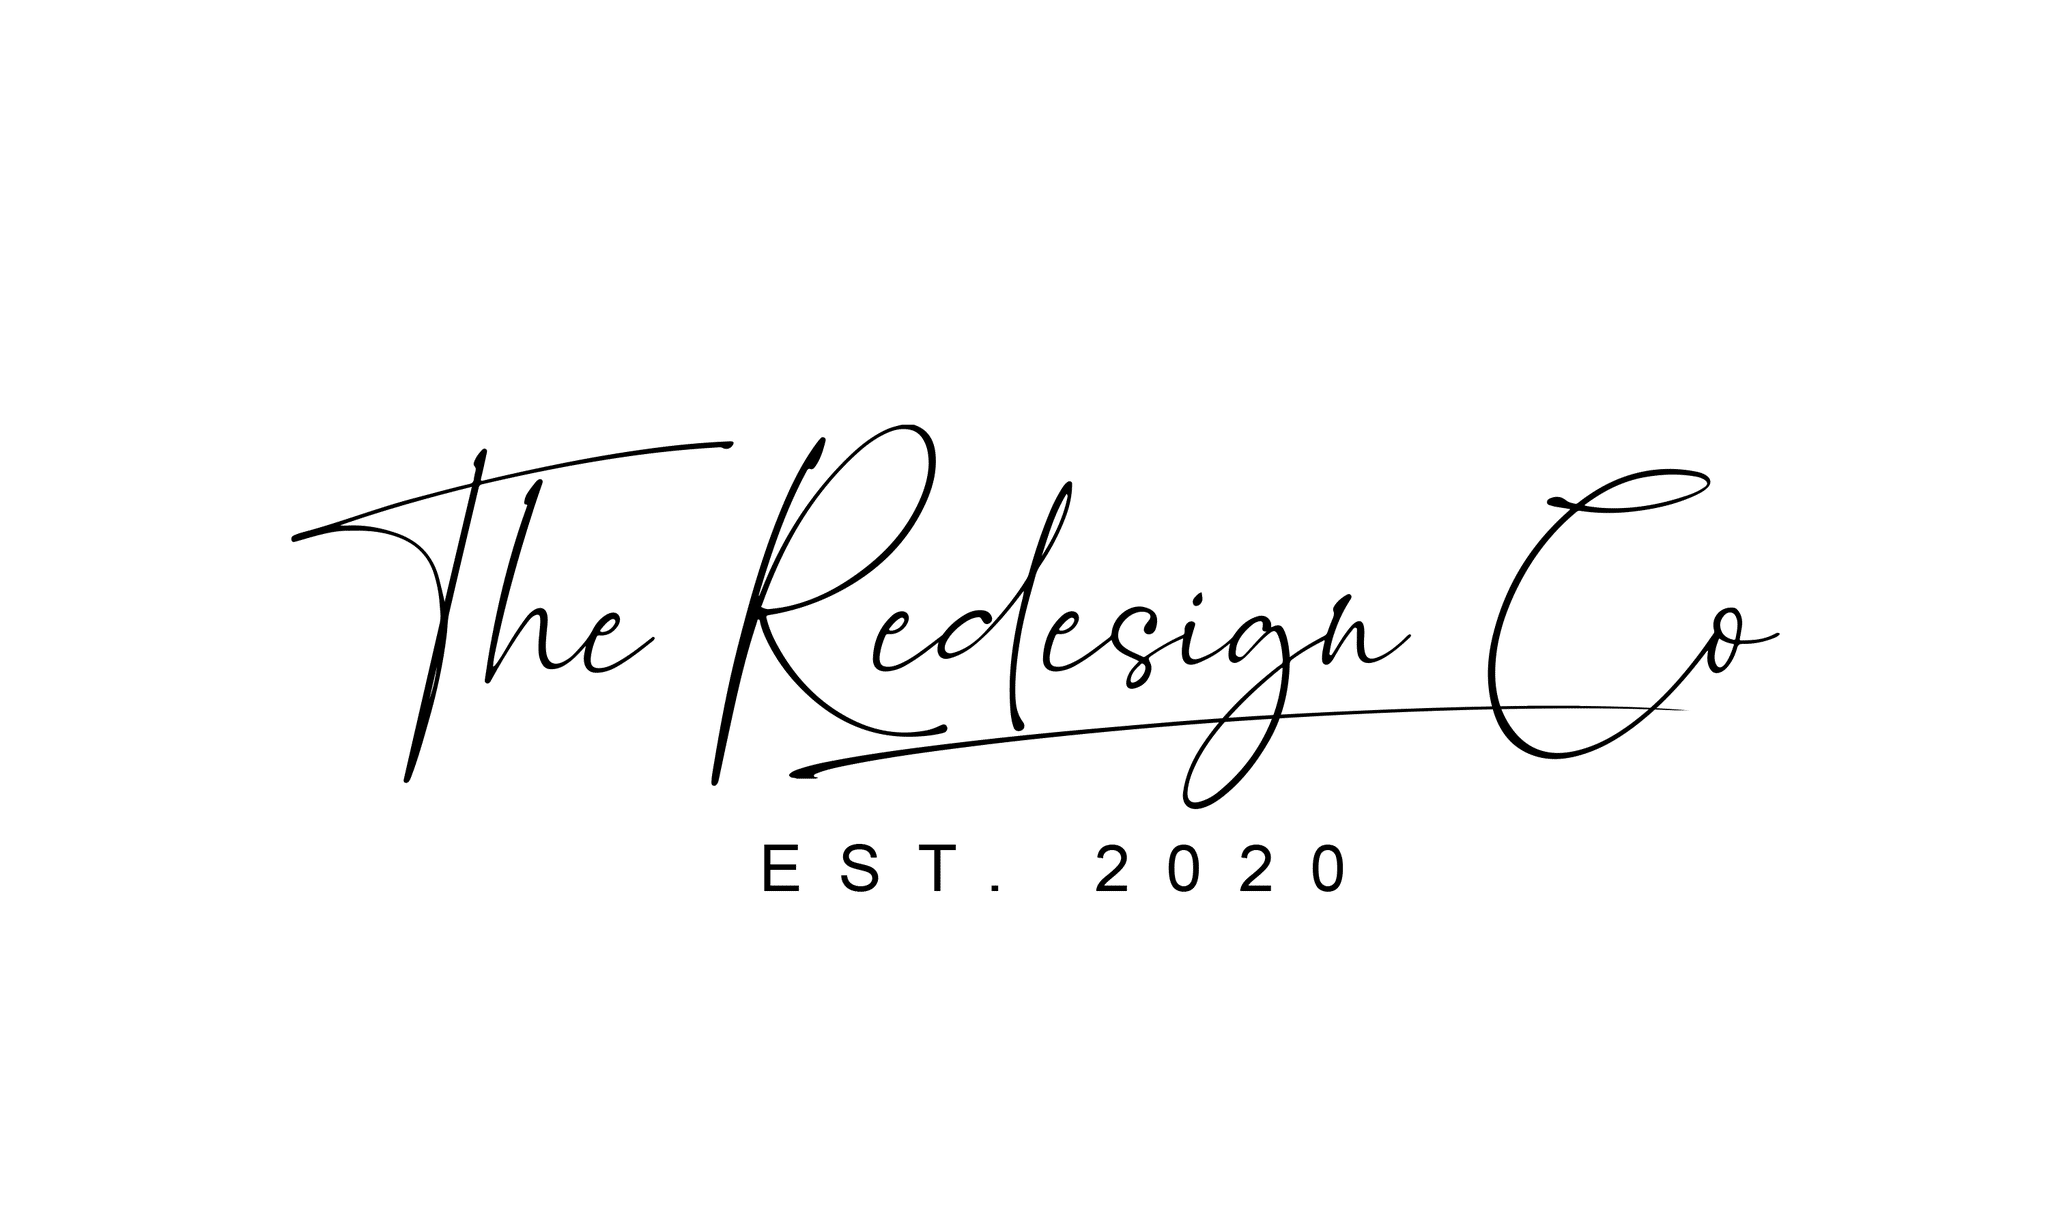 The Redesign Company